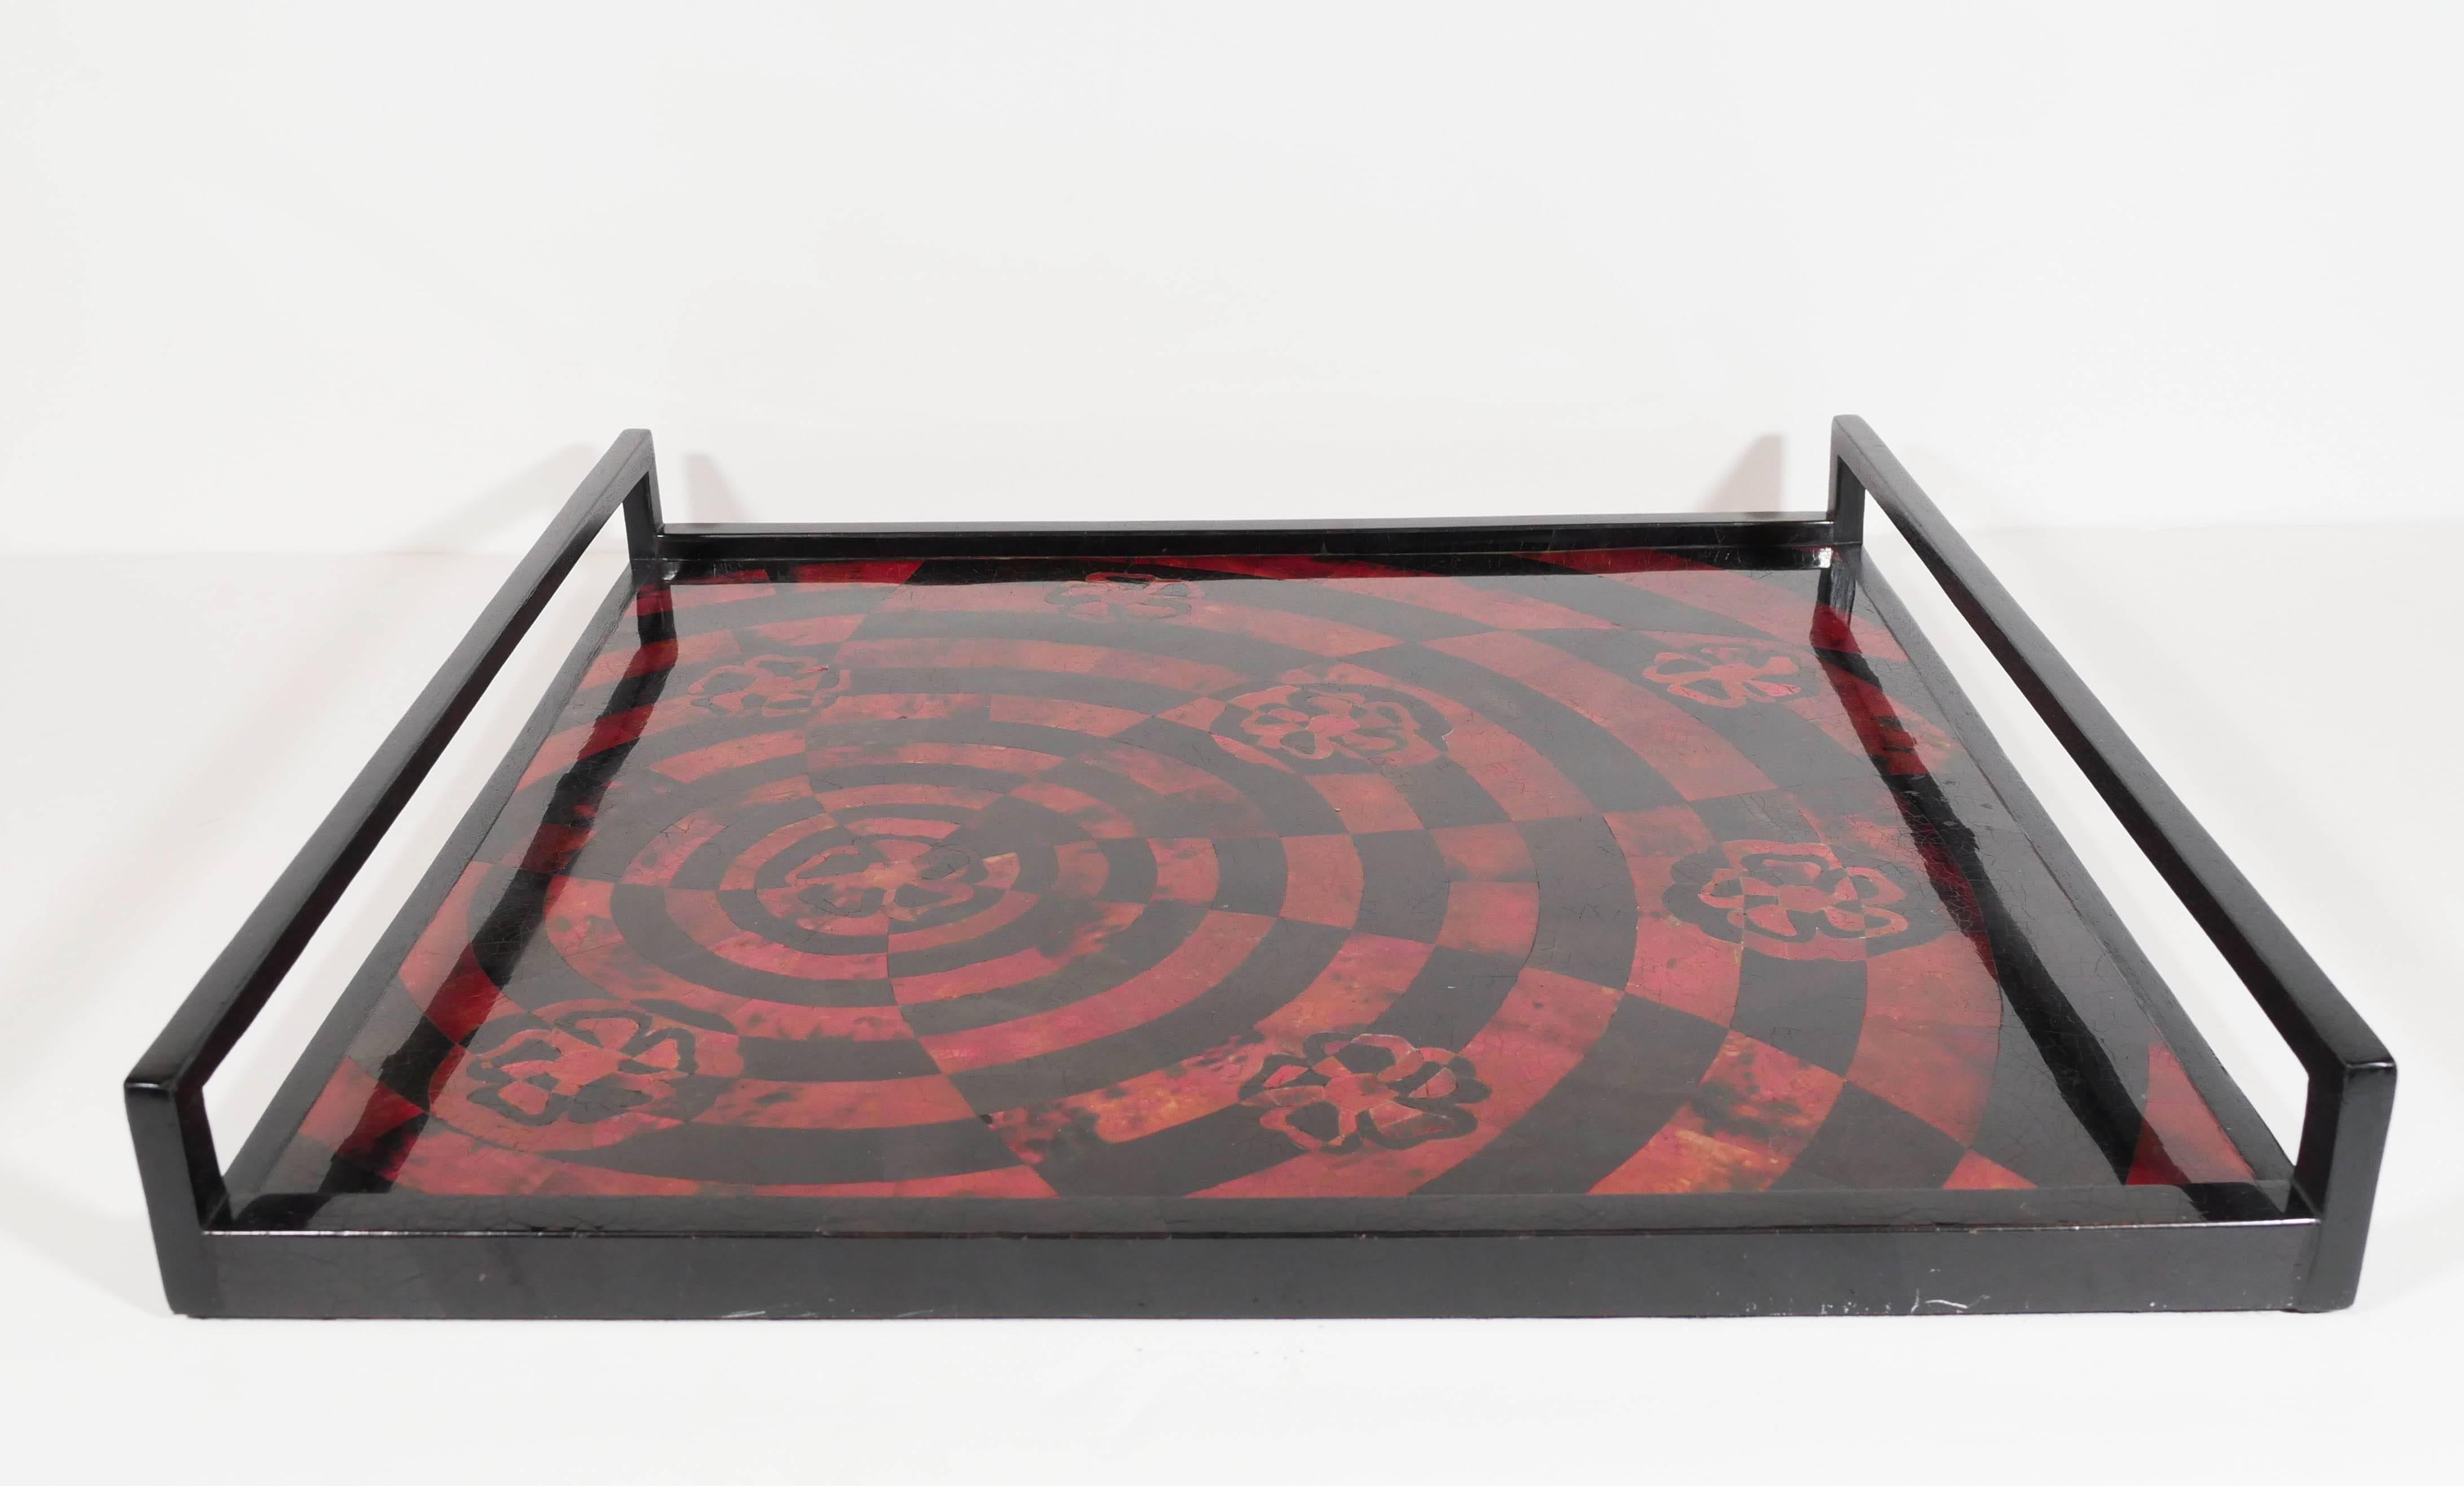 Penshell tray in opulent tones of red and black. Hand-dyed and lacquered, featuring mosaic inlay top with geometric patterns. All handcrafted with handles in ebonized palm wood. Excellent addition to any barware set, or as a decorative tabletop or